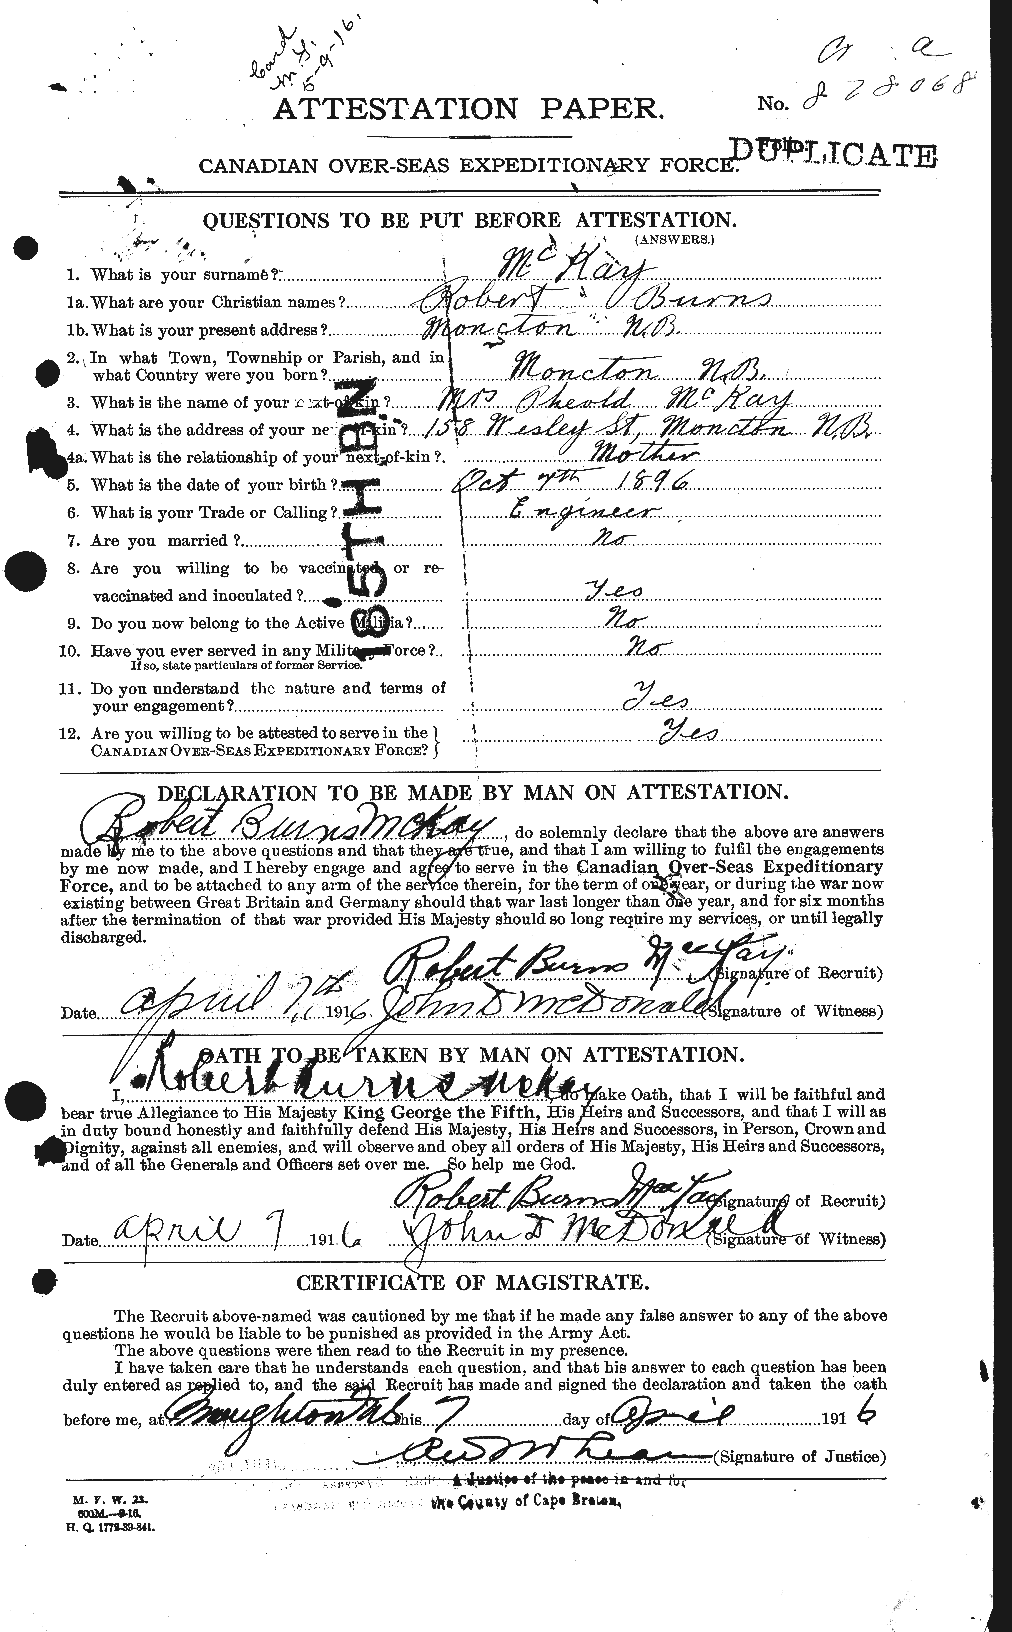 Personnel Records of the First World War - CEF 530087a